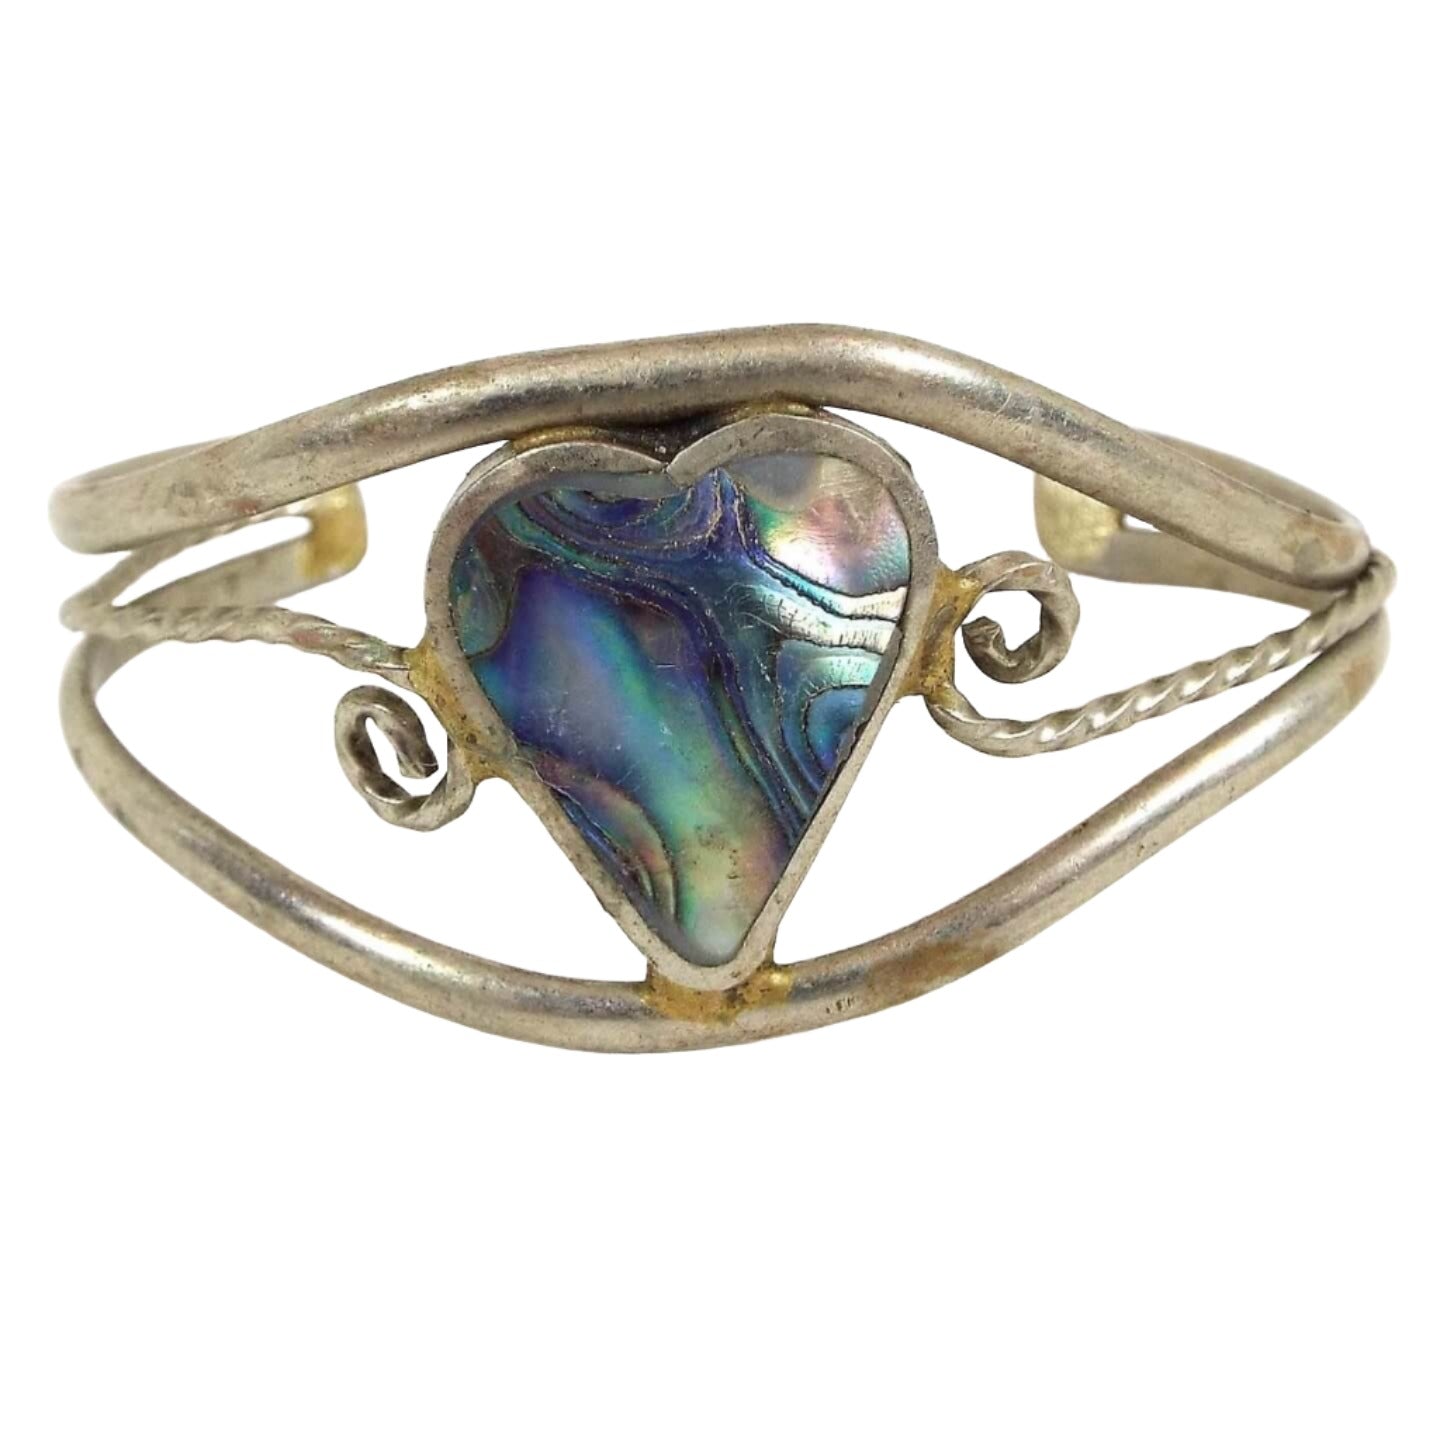 Front view of the Alpaca cuff bracelet. The bracelet is silver in color with a large heart shape in the middle. Inside the heart is inlaid abalone shell which has wavy areas of pearly multi color shell. There is a band of metal above and below the heart that curve around to form the cuff part of the bracelet, and a thinner twisted band of metal in the middle that comes off each side of the heart. 